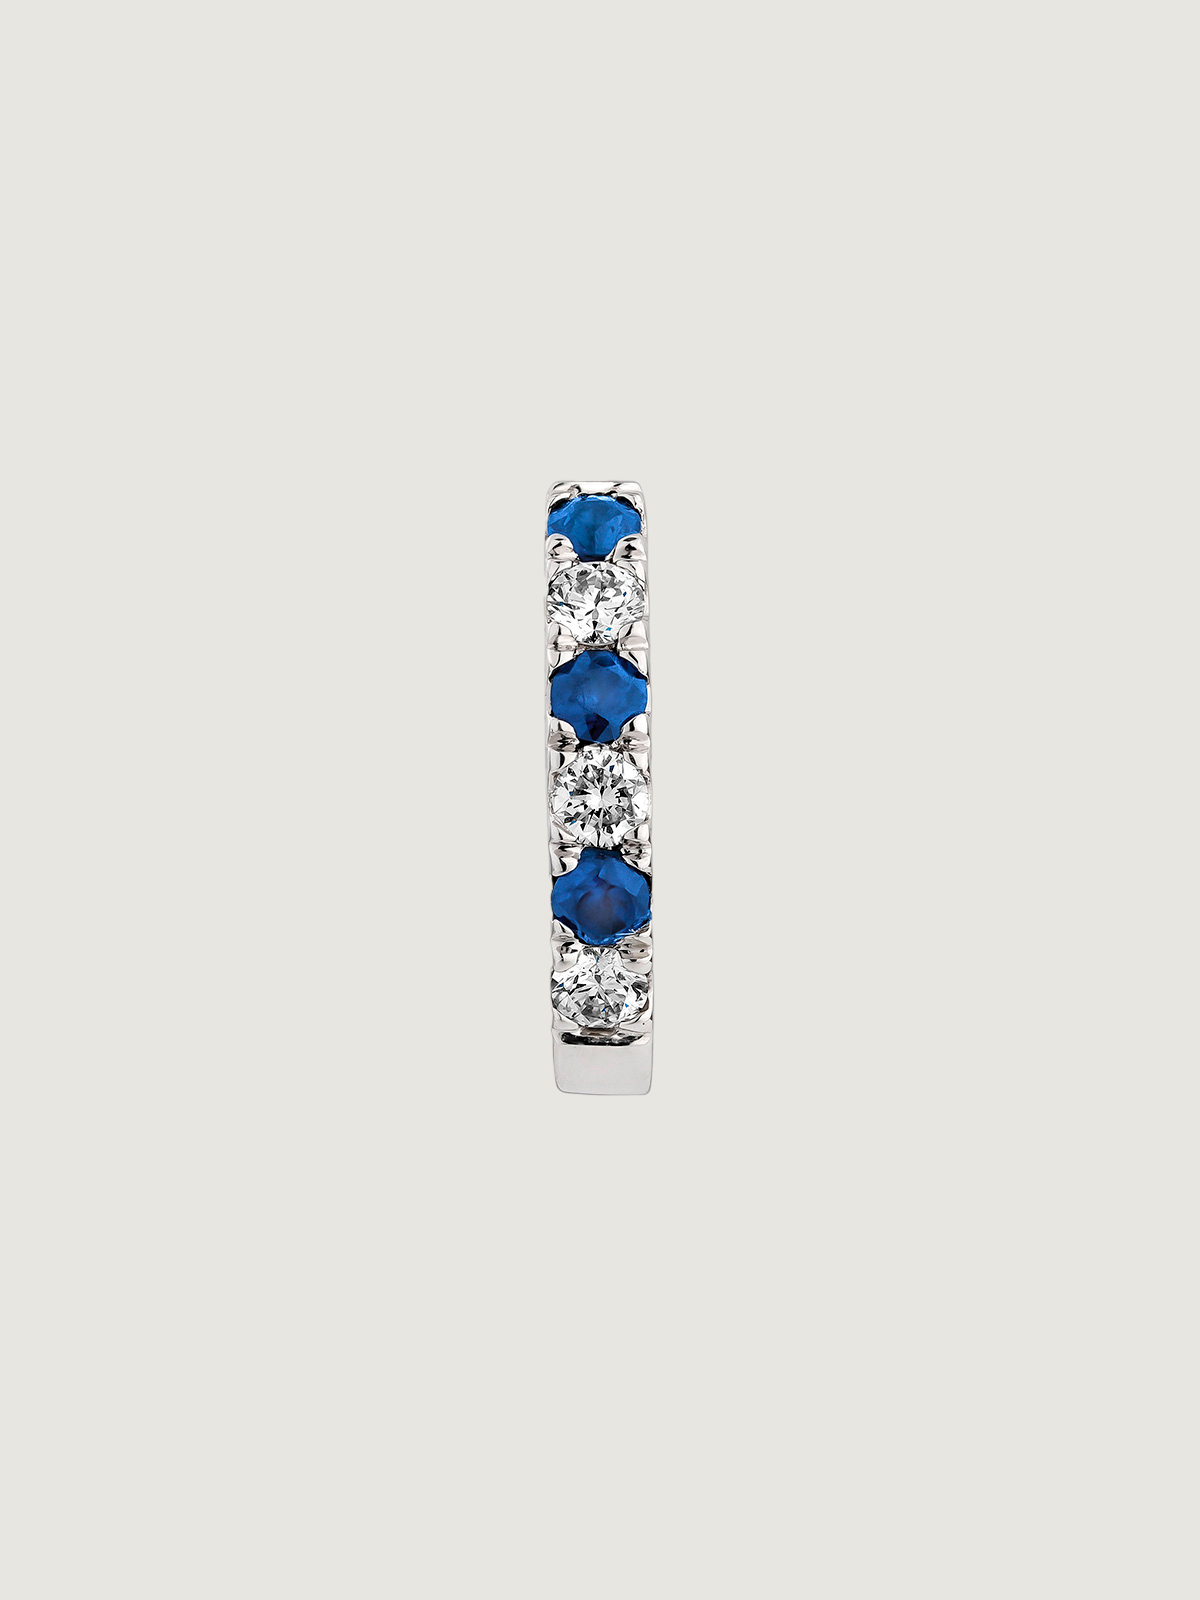 Individual small 9K white gold hoop earring with blue sapphires and diamonds